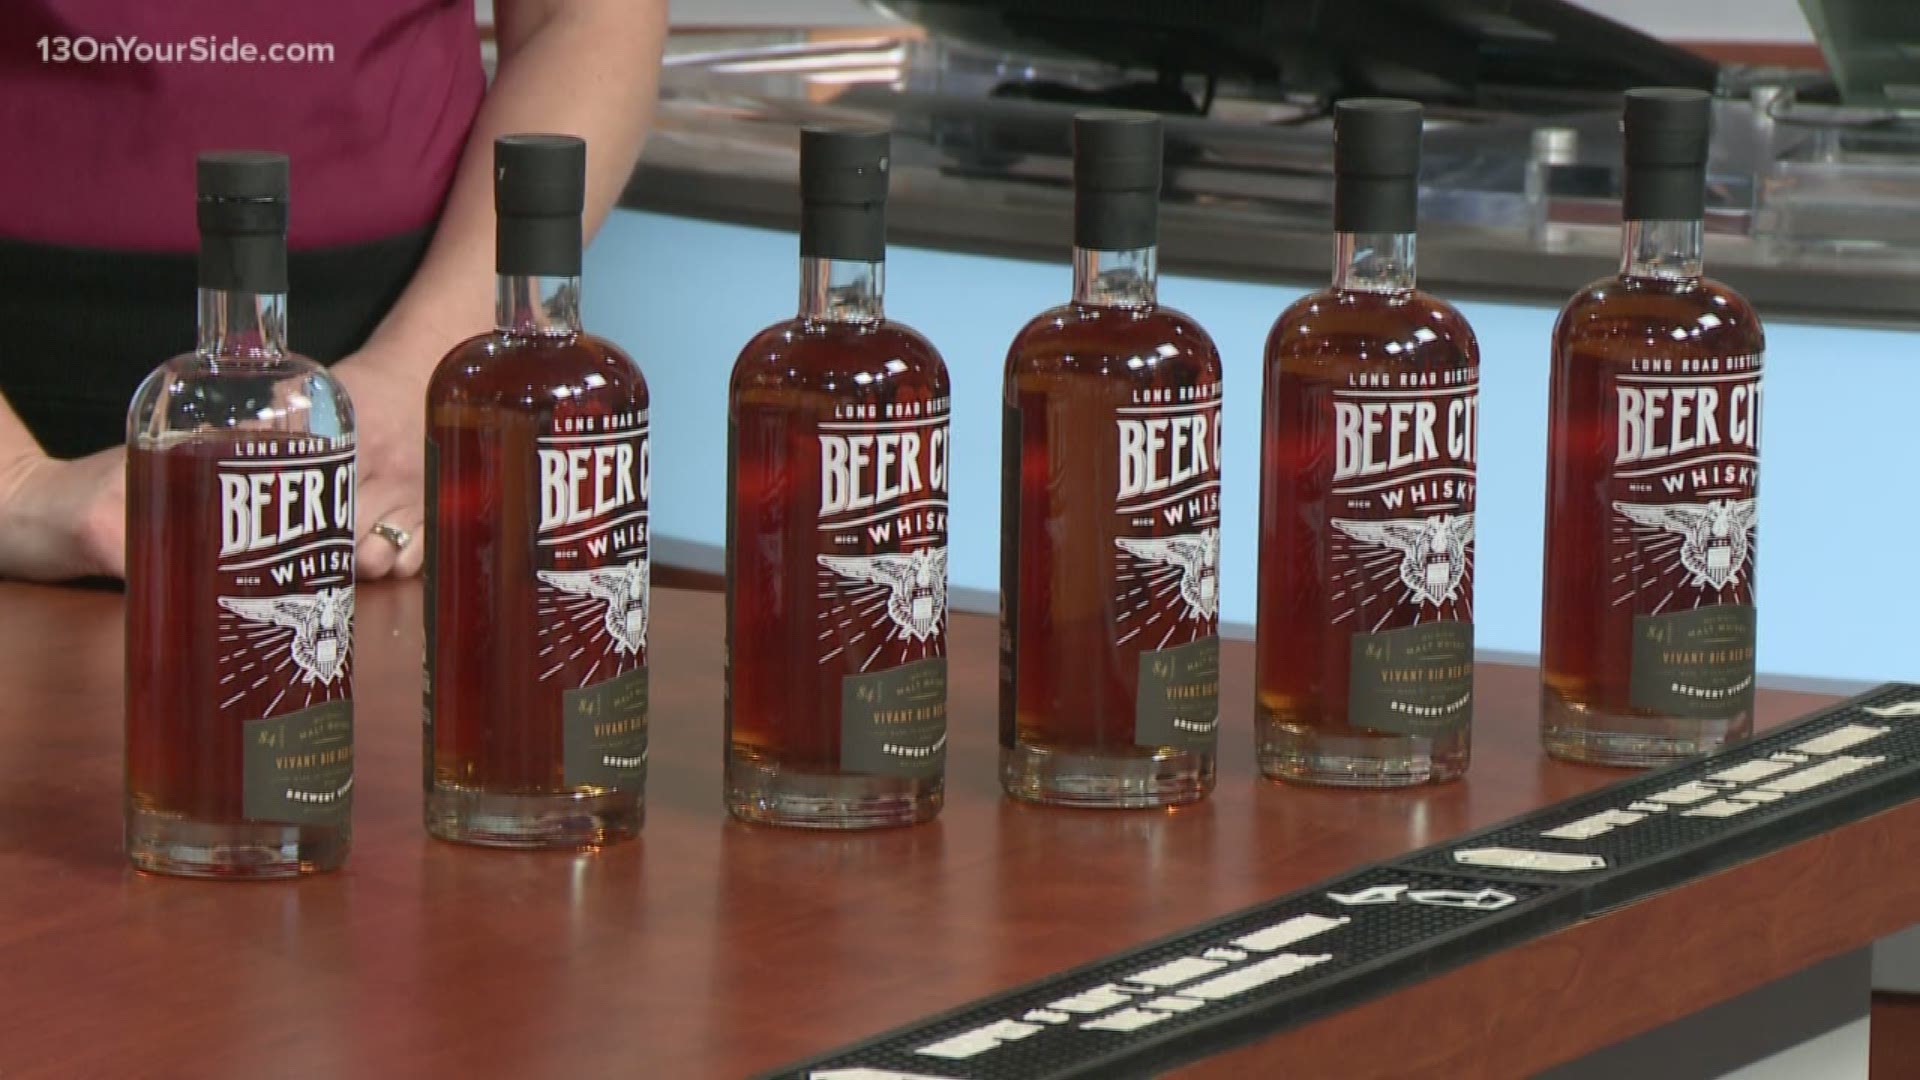 Long Road Distillers and Brewery Vivant have come together to create Vivant Big Red Coq Malt Whiskey.